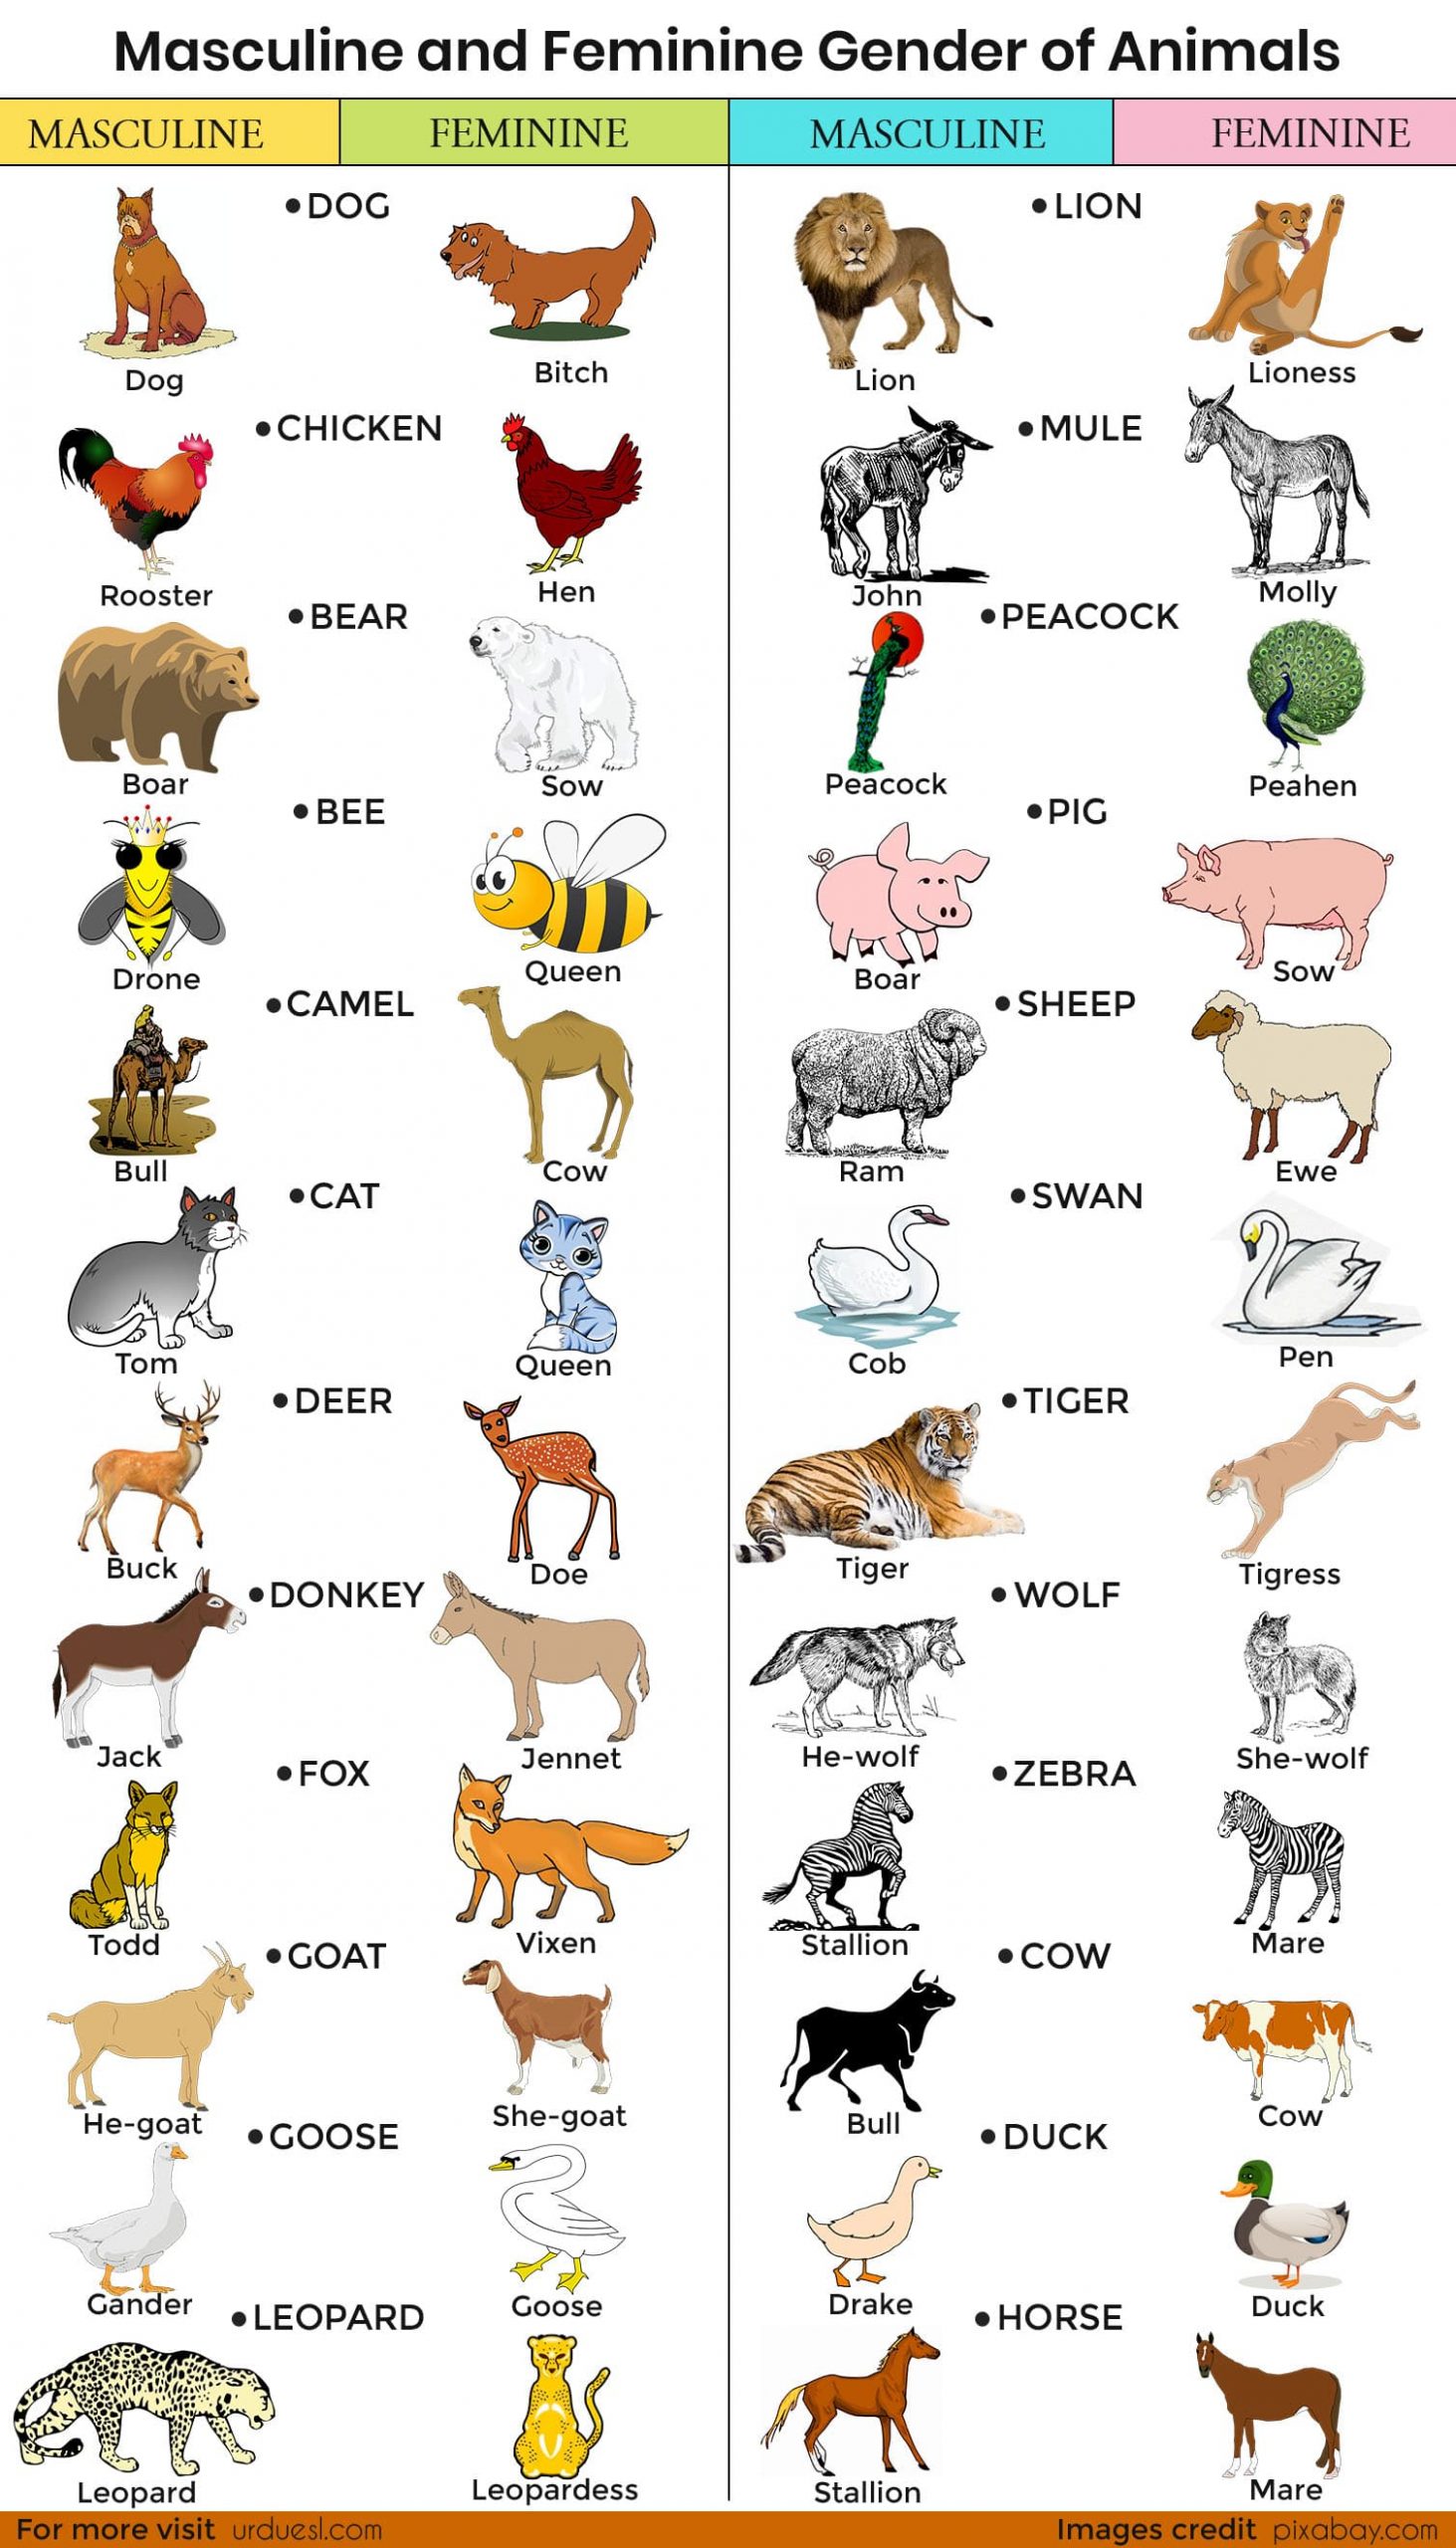 Masculine and Feminine Gender of Animals - Male and Female Animals